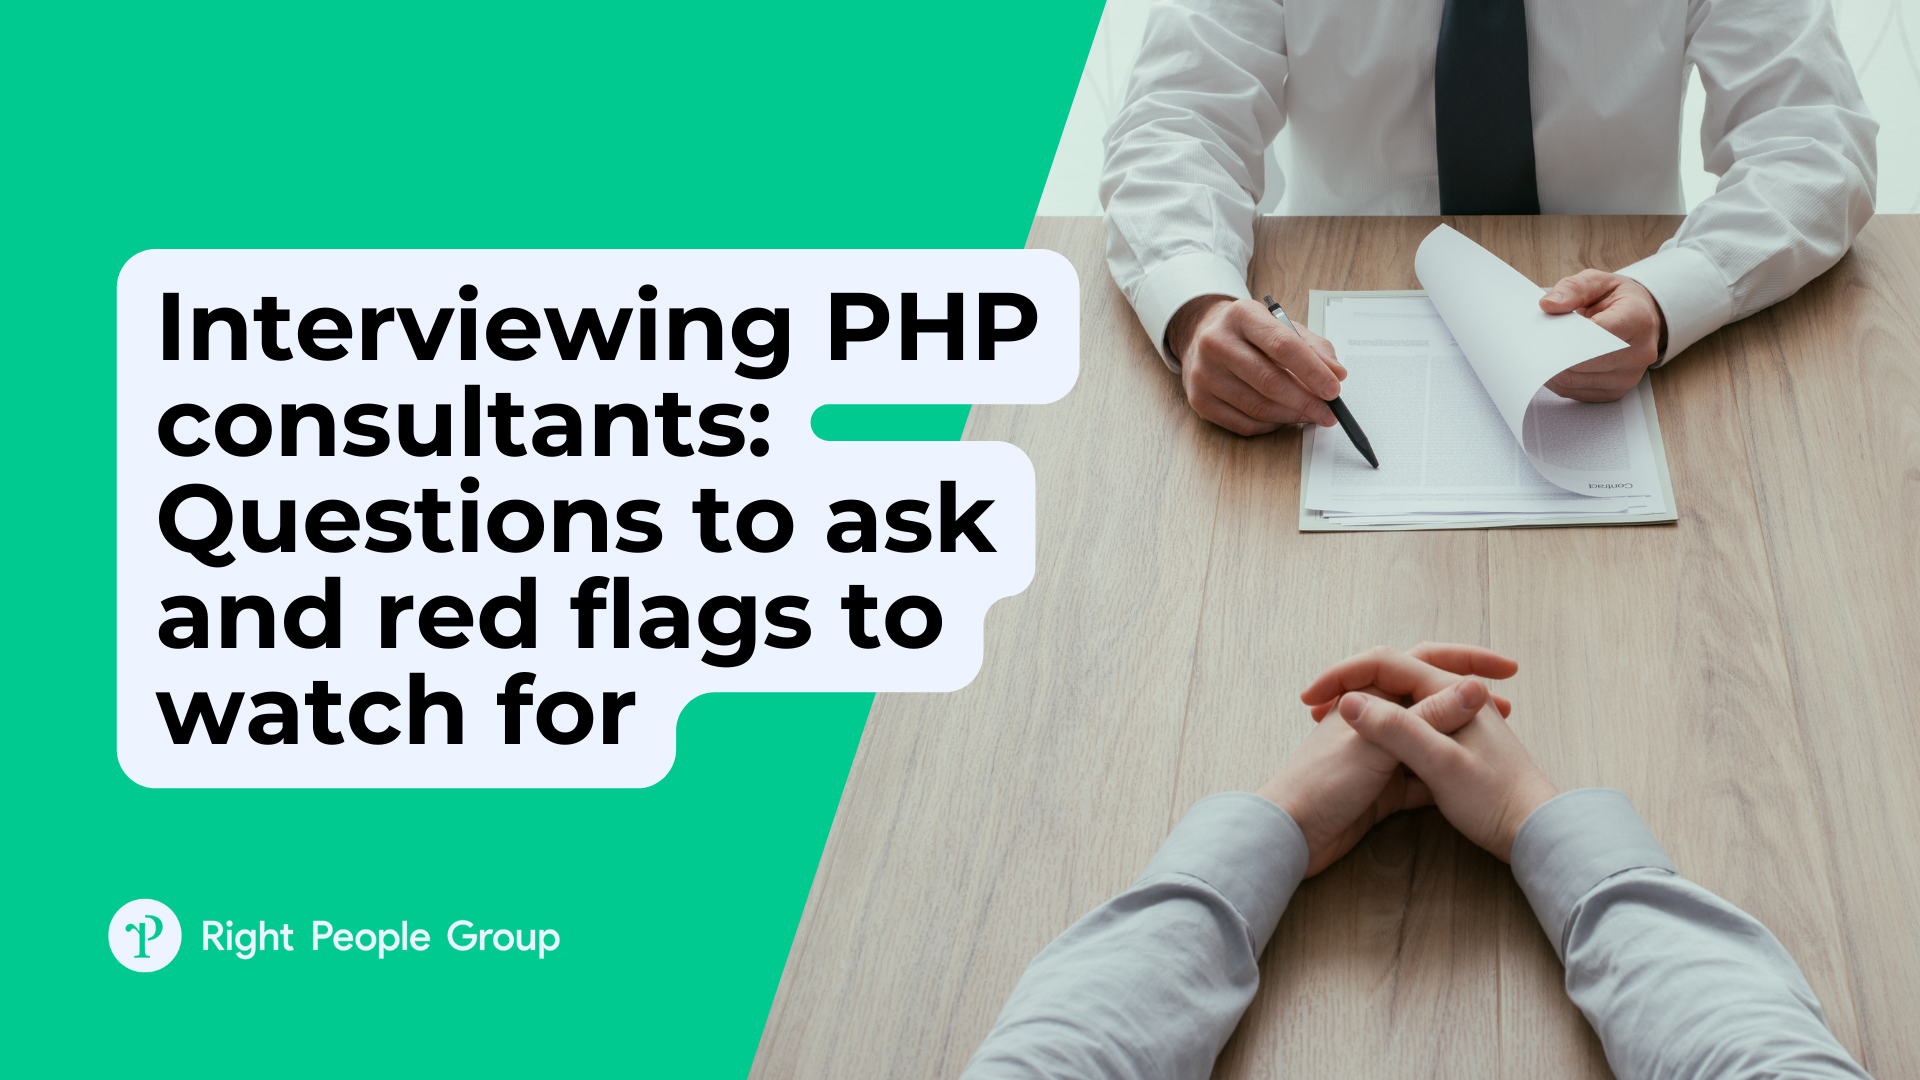 Interviewing PHP consultants: Questions to ask and red flags to watch for